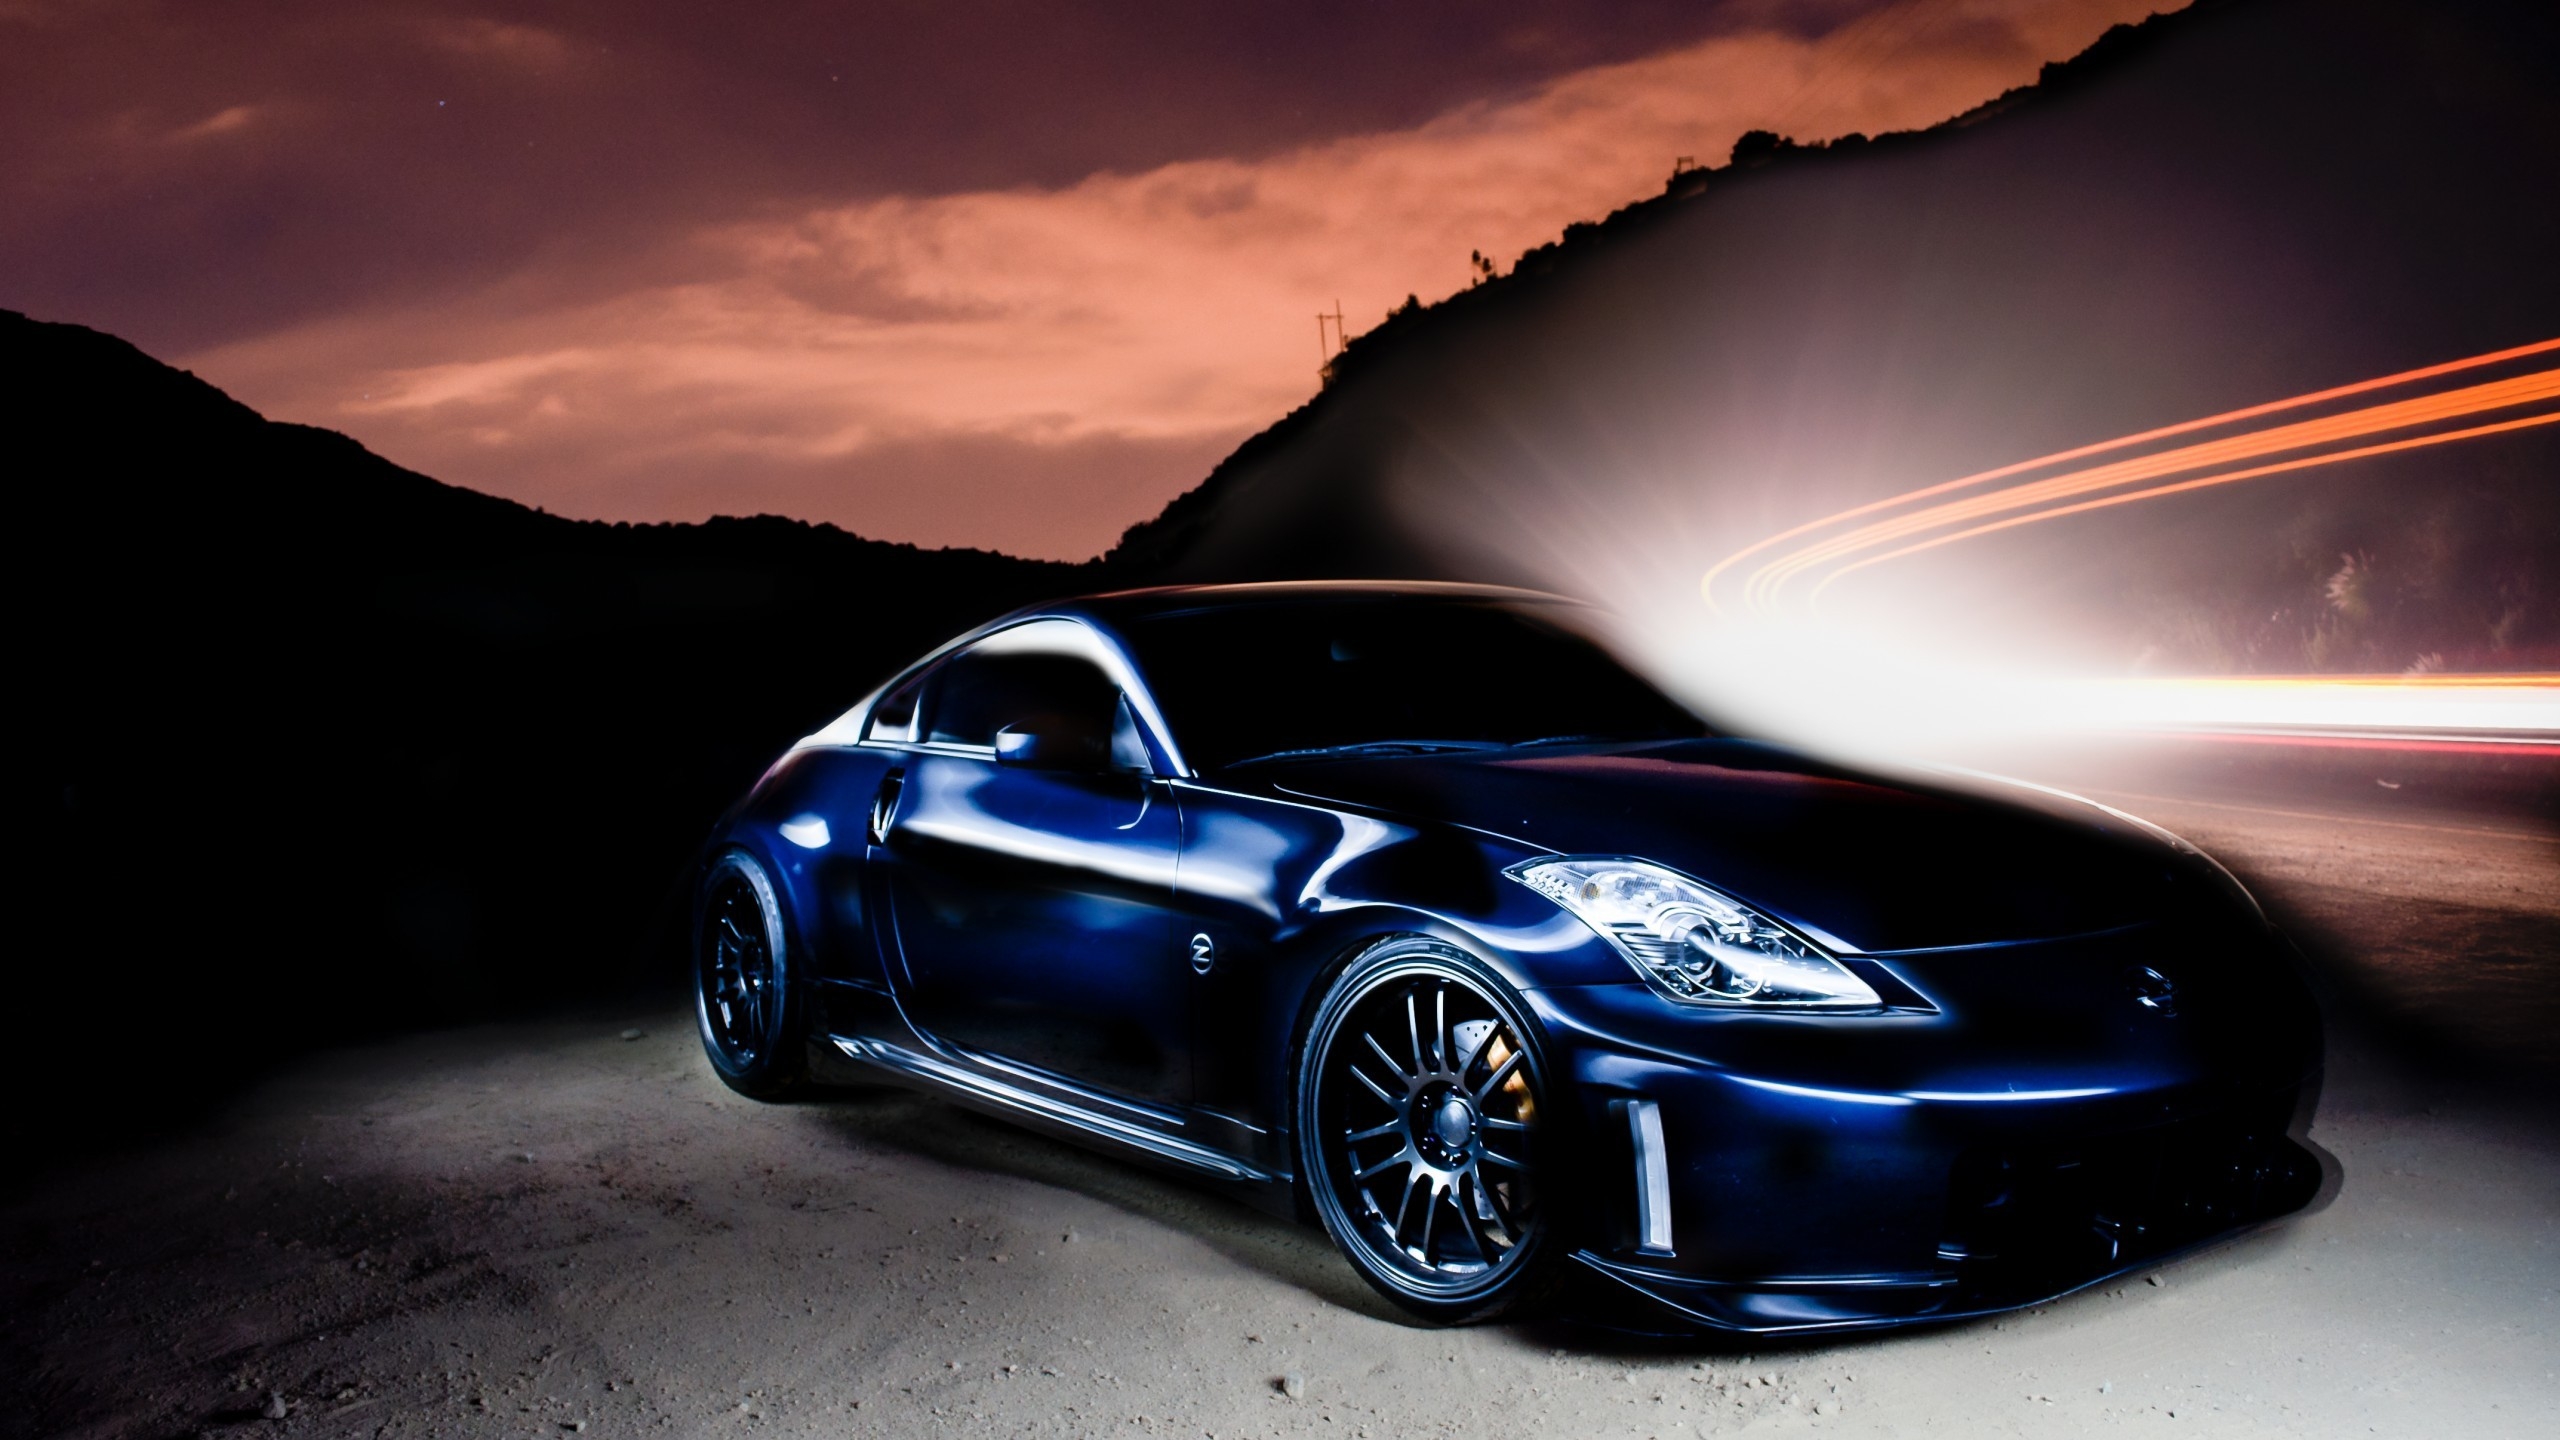 Nissan 350 Z Tuning for 2560x1440 HDTV resolution